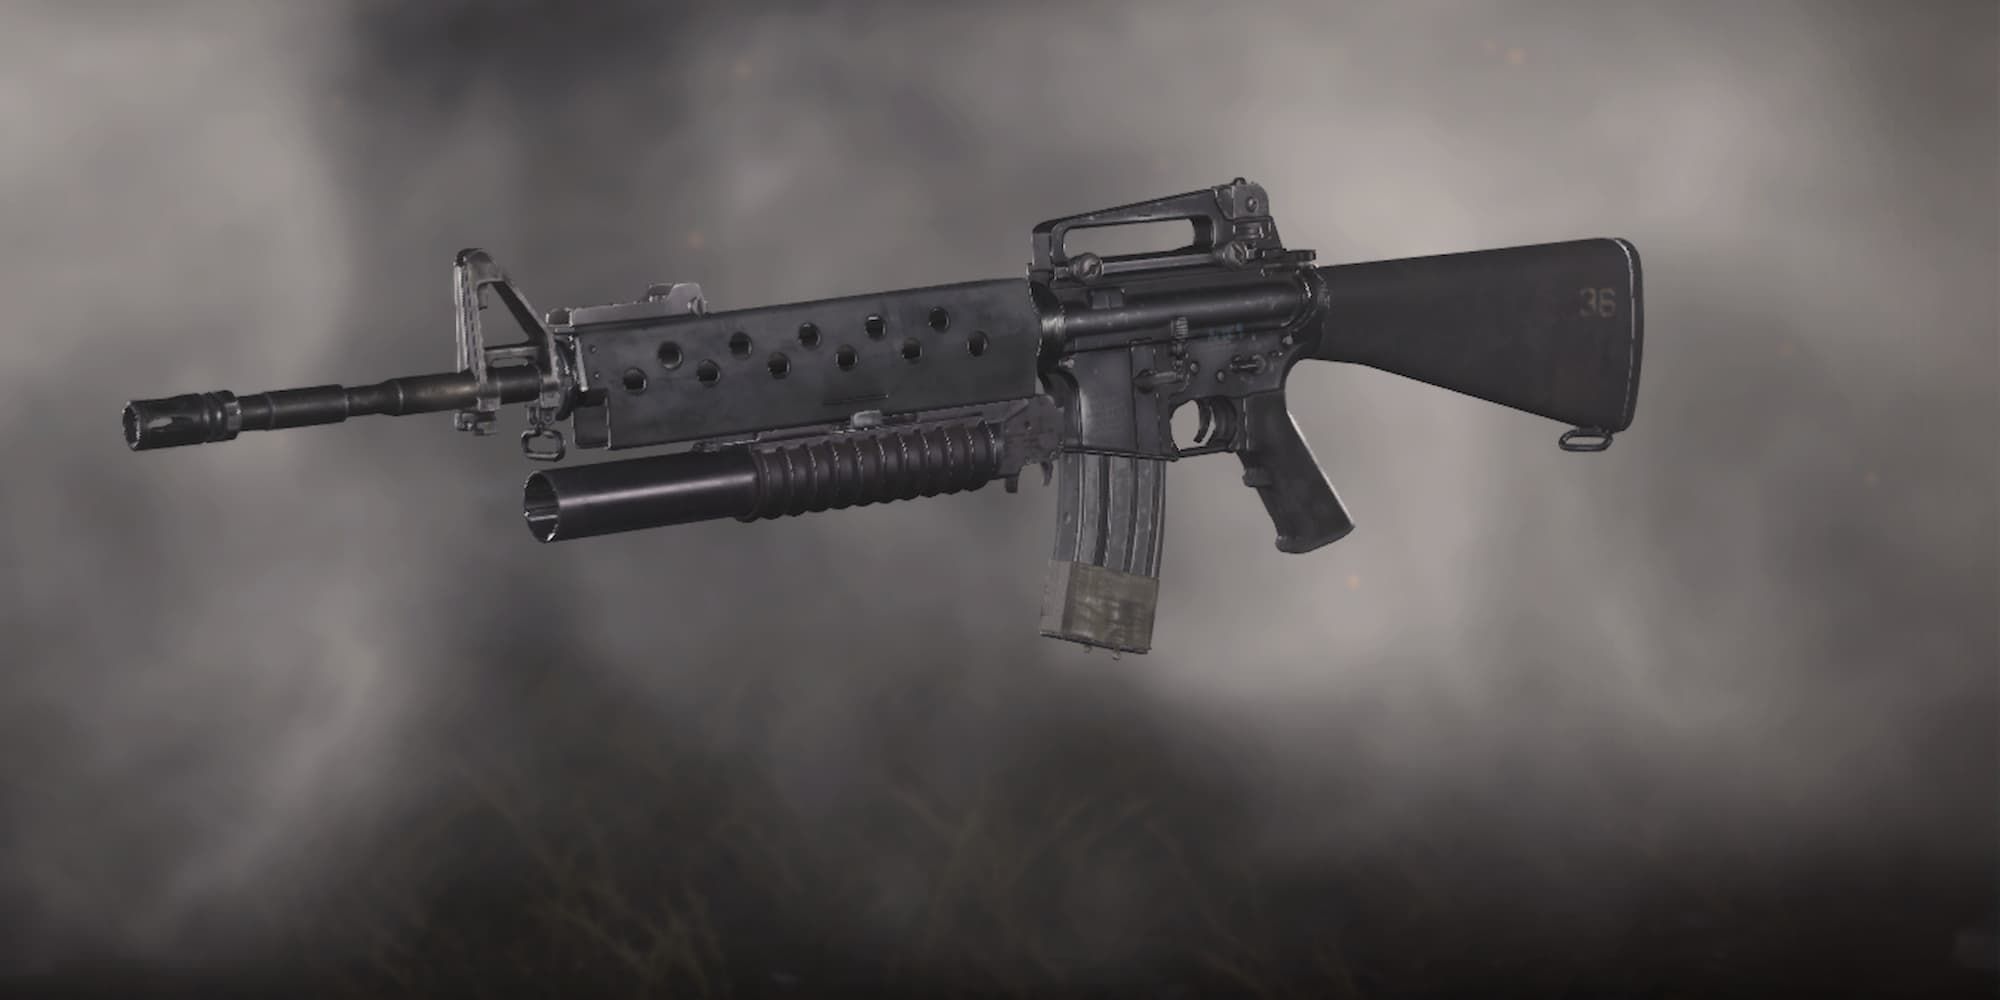 The Grenade Launcher is attached to the underside of the assault rifle.